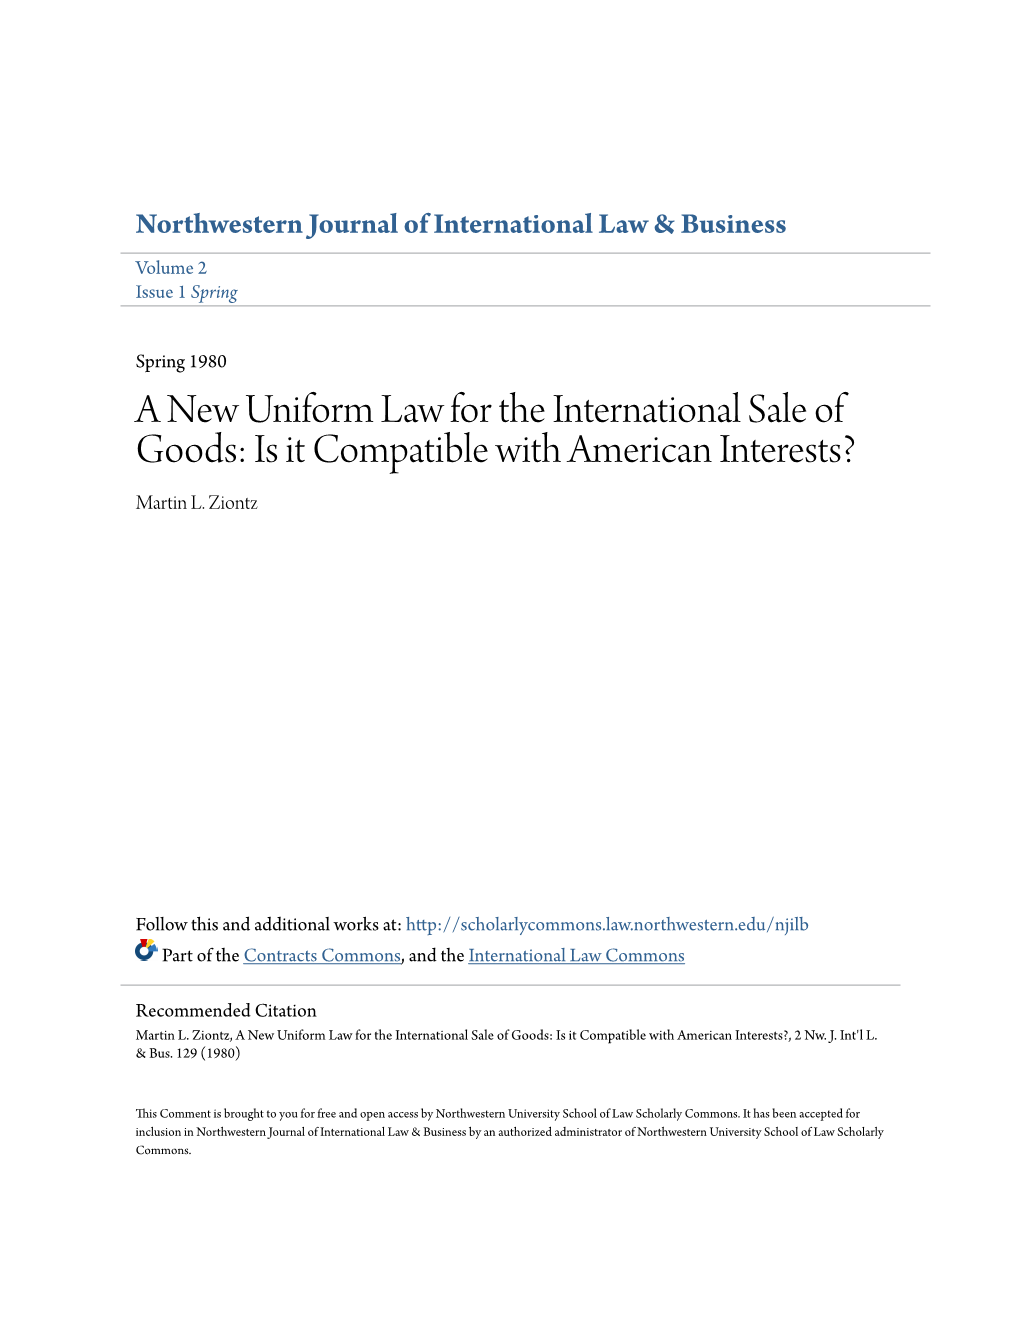 A New Uniform Law for the International Sale of Goods: Is It Compatible with American Interests? Martin L